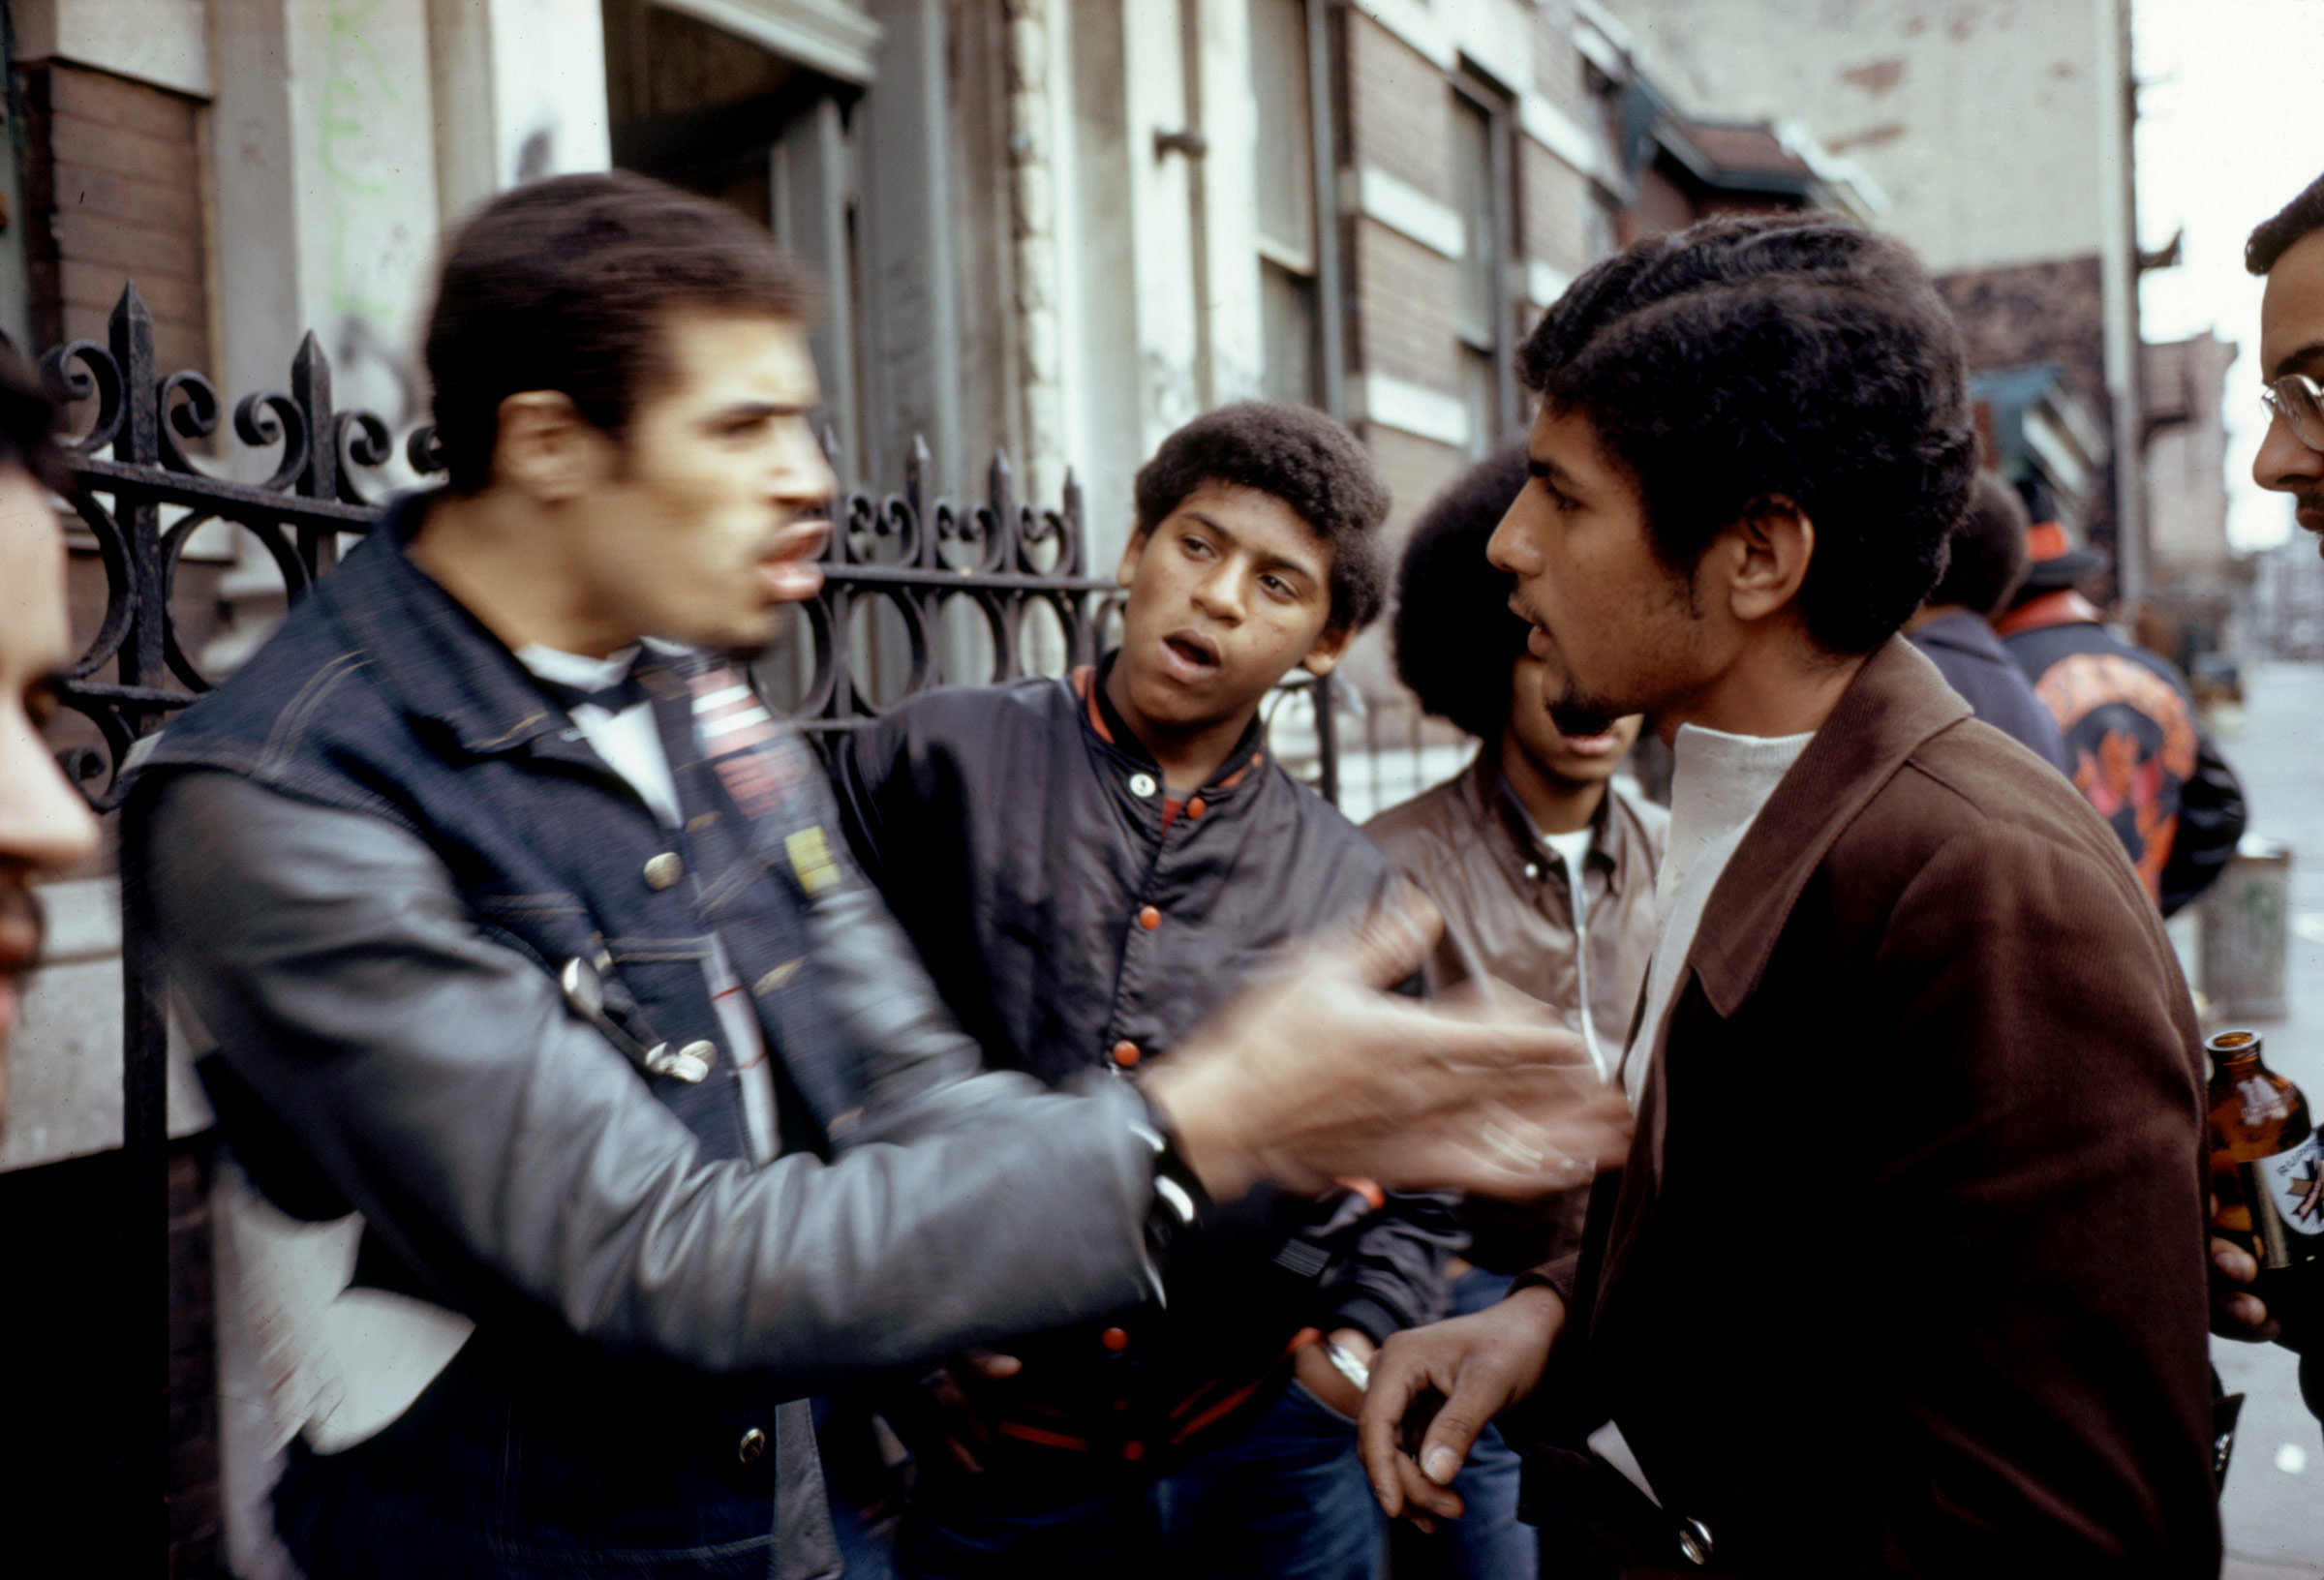 Eddie Cuevas from the gang 'Reapers' discussing with another gang called the 'Javelins' about cleaning up the neighborhood, Bronx, New York, 1972. (John Shearer—The LIFE Picture Collection/Gett)